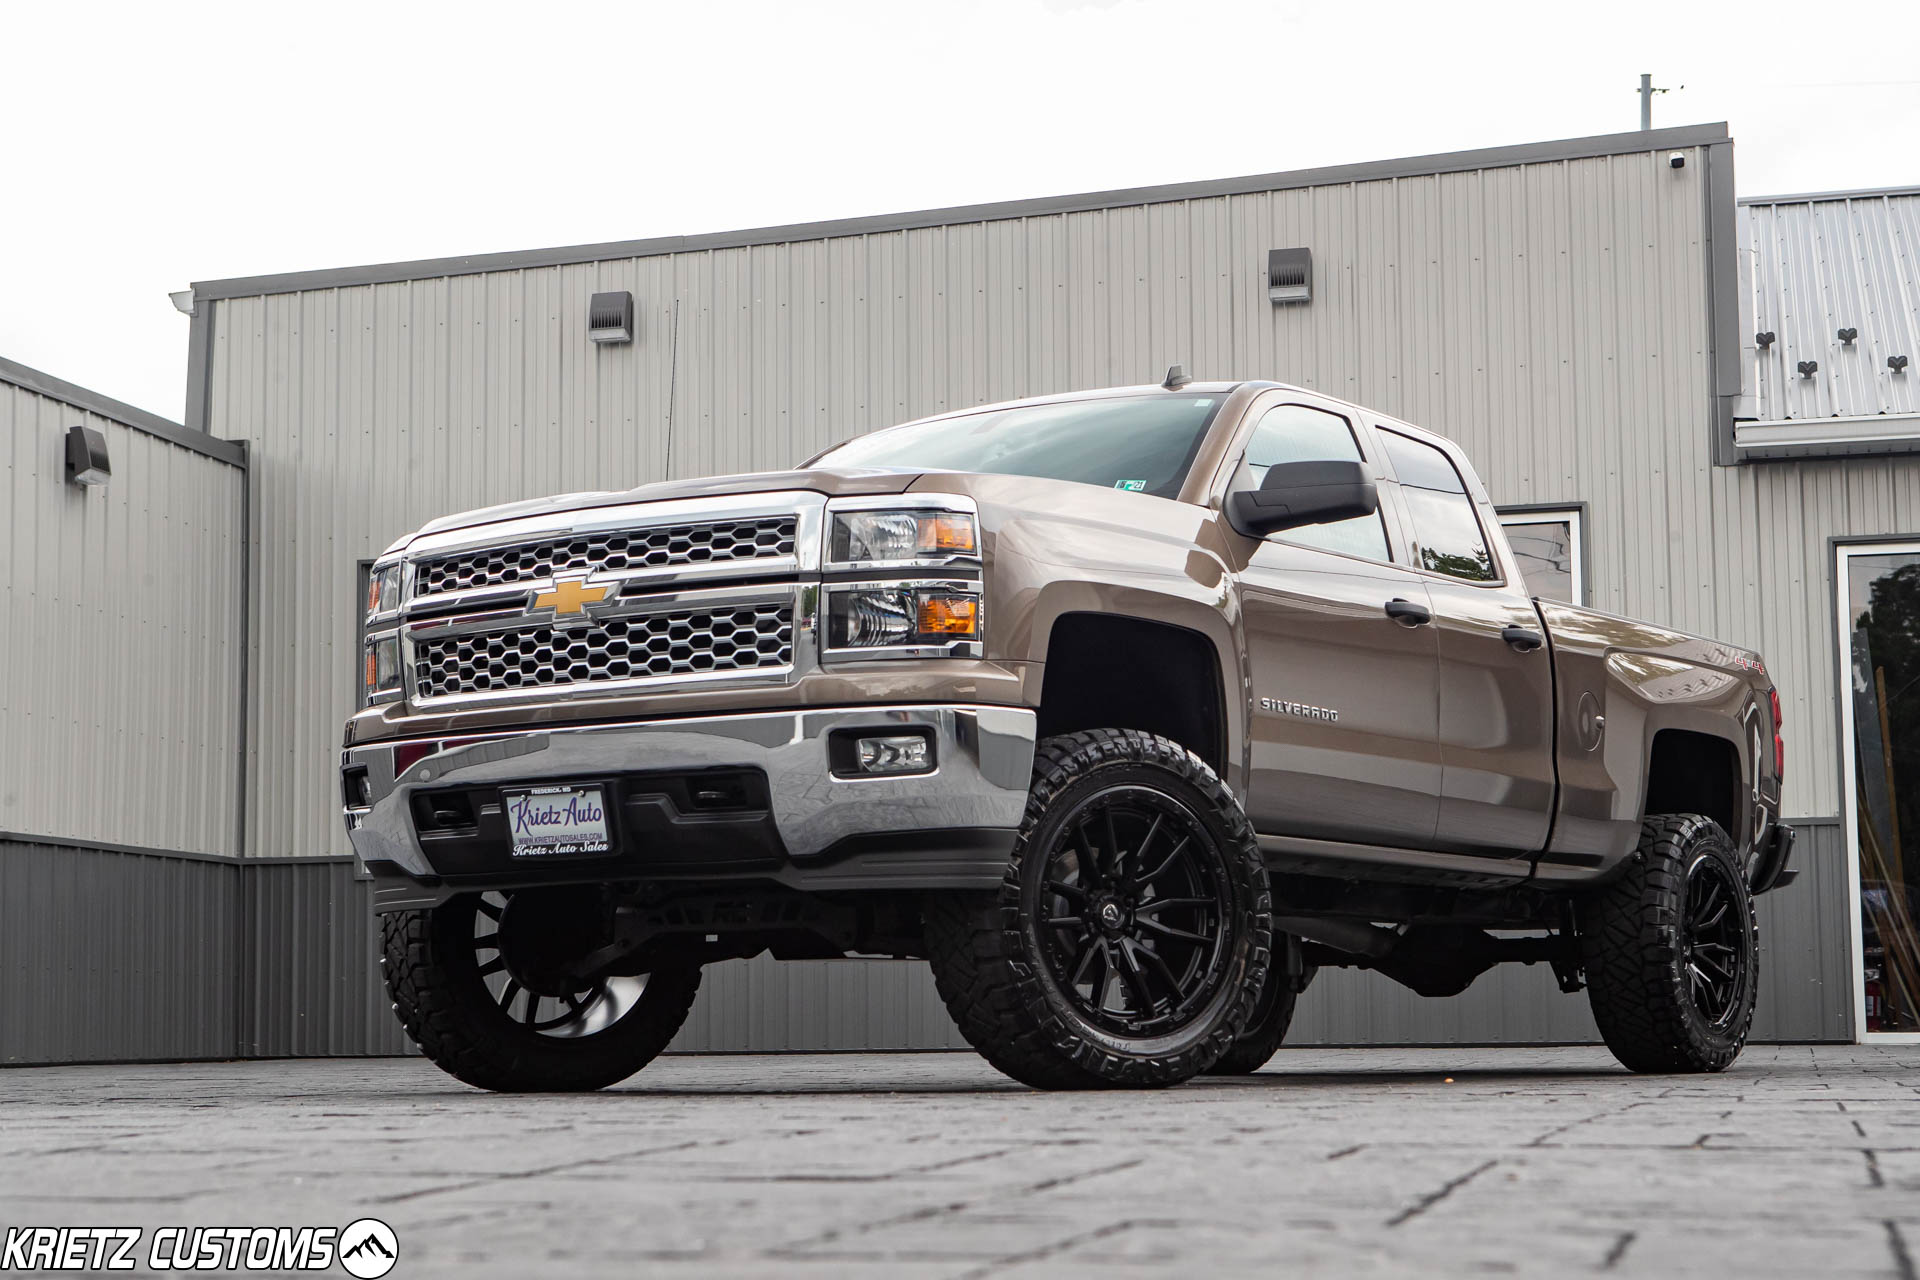 Lifted 2014 Chevy Silverado 1500 with 7 Inch Rough Country Suspension Lift Kit and 22×10 Fuel 2014 Chevy Silverado 1500 7 Inch Lift